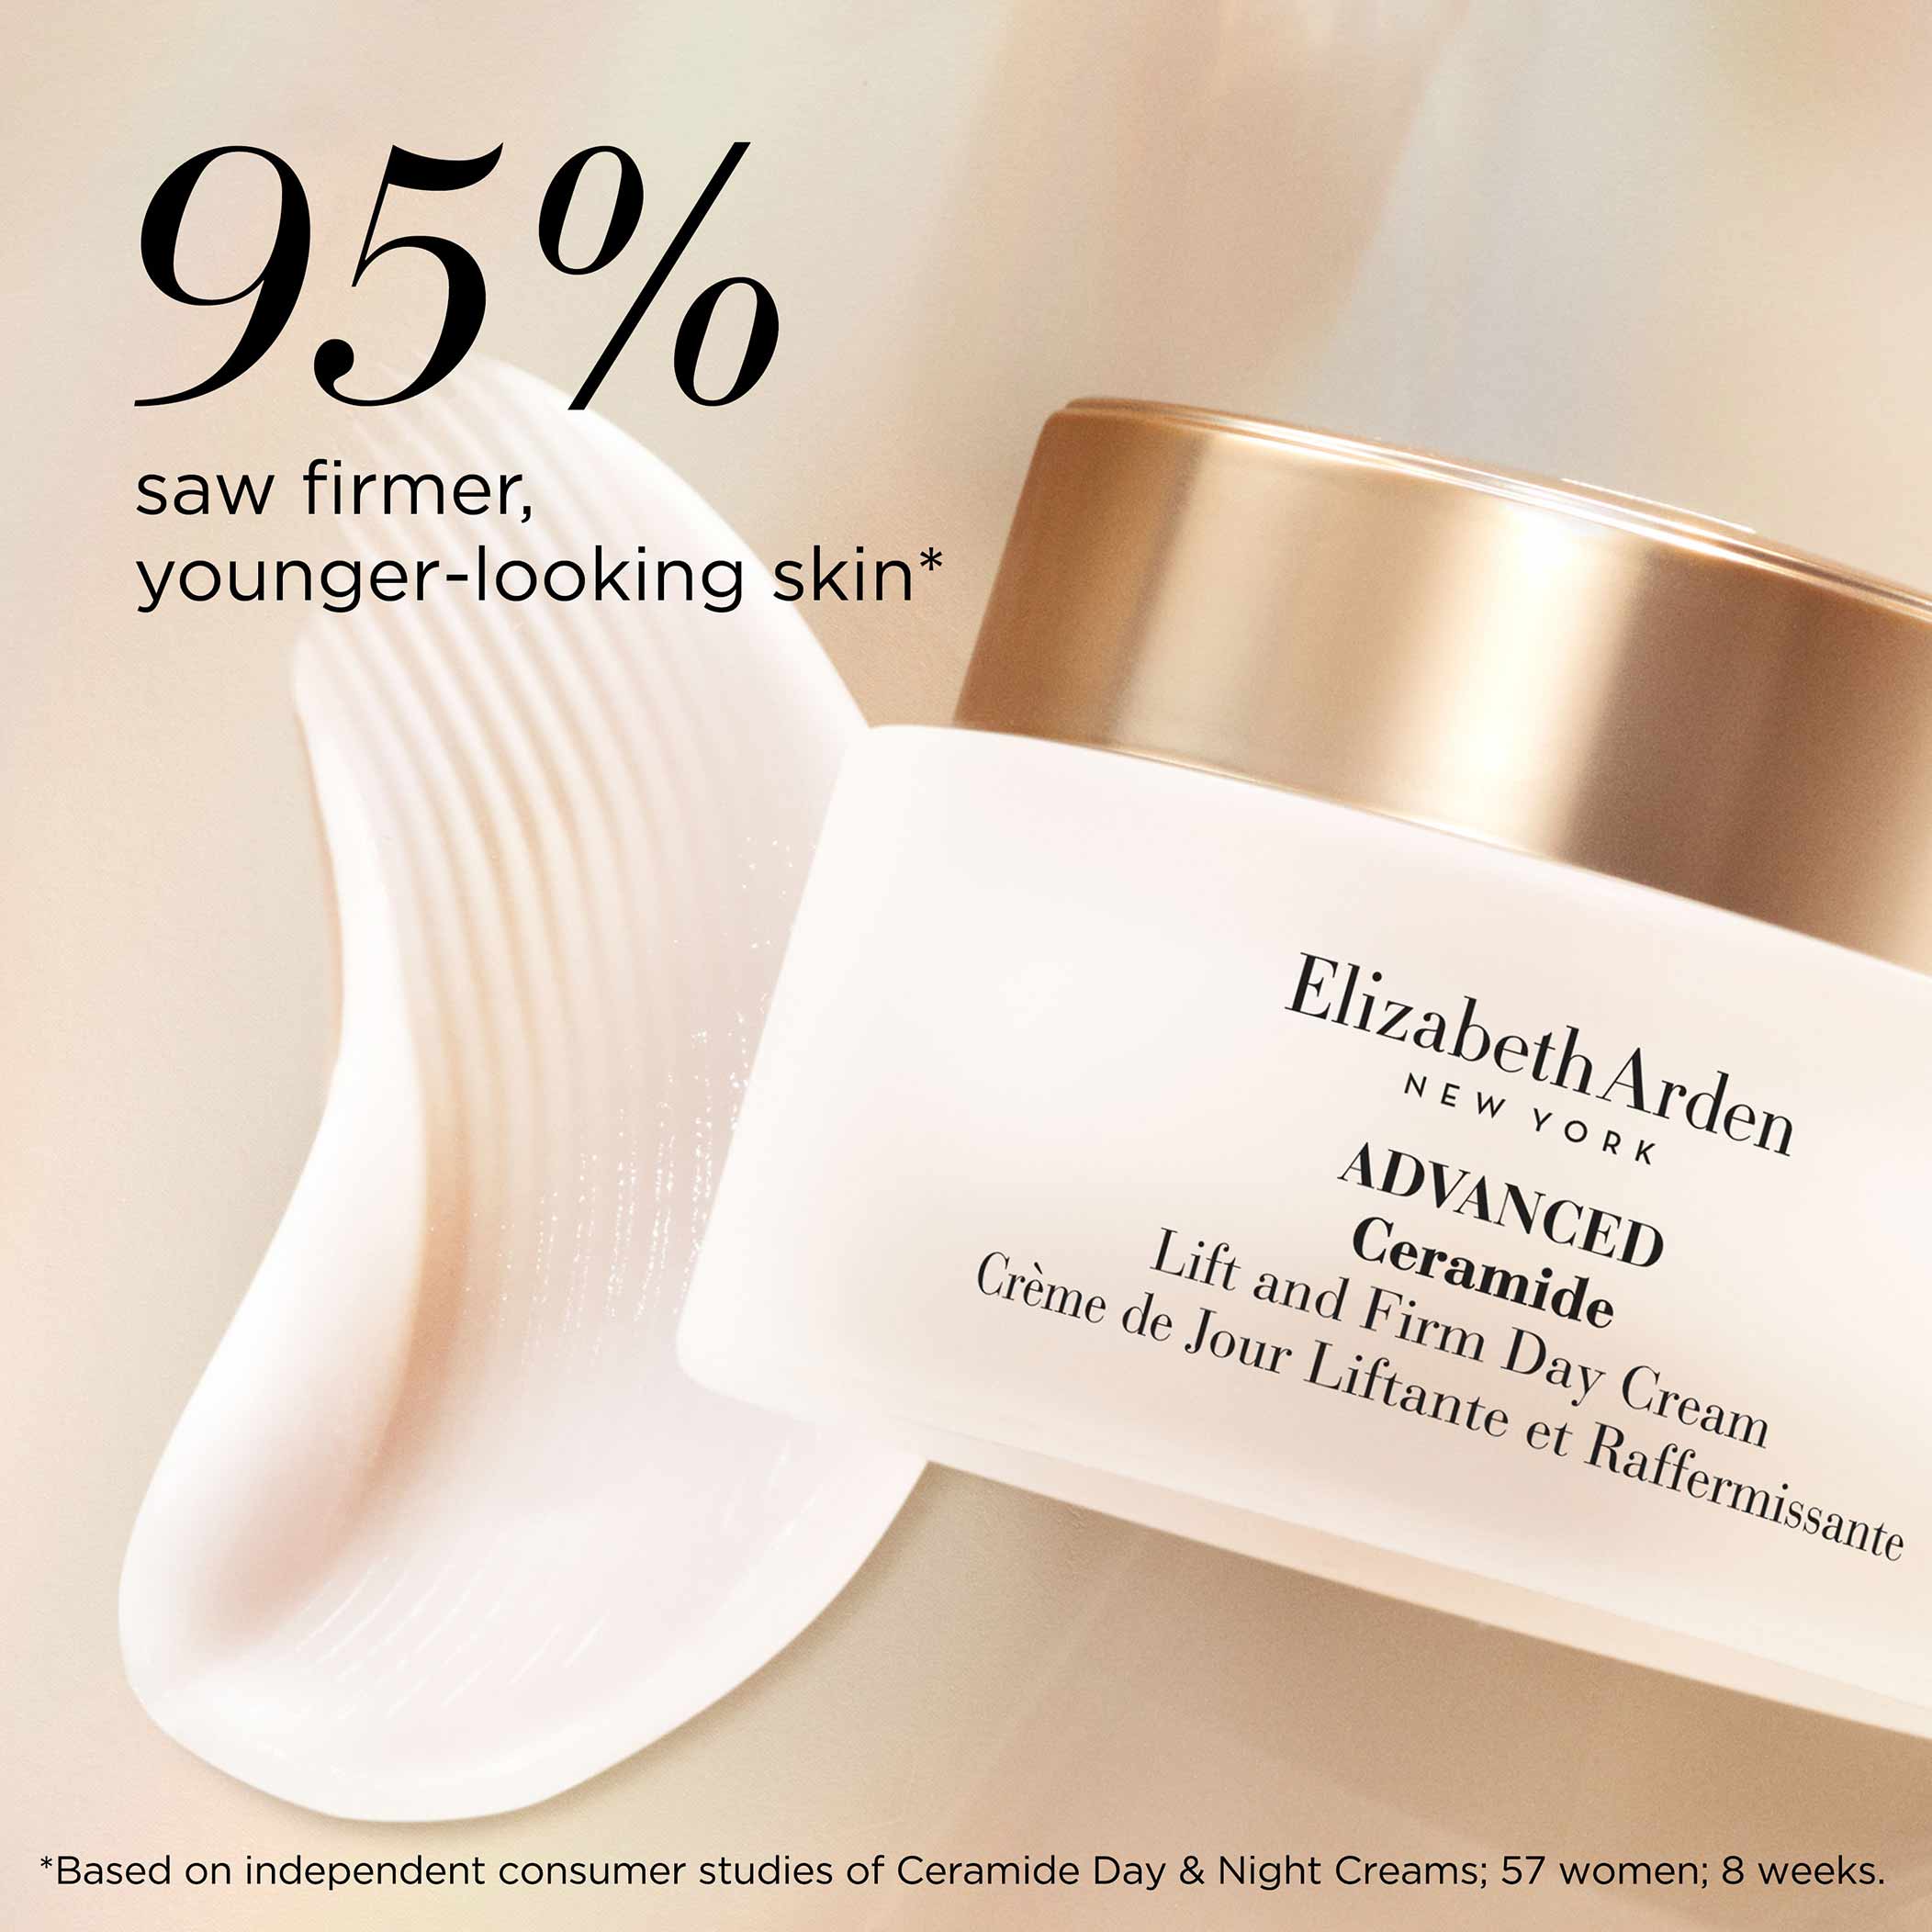 95% saw firmer, younger-looking skin based on independent consumer studies of Day and Night Creams, 57 women, 8 week.